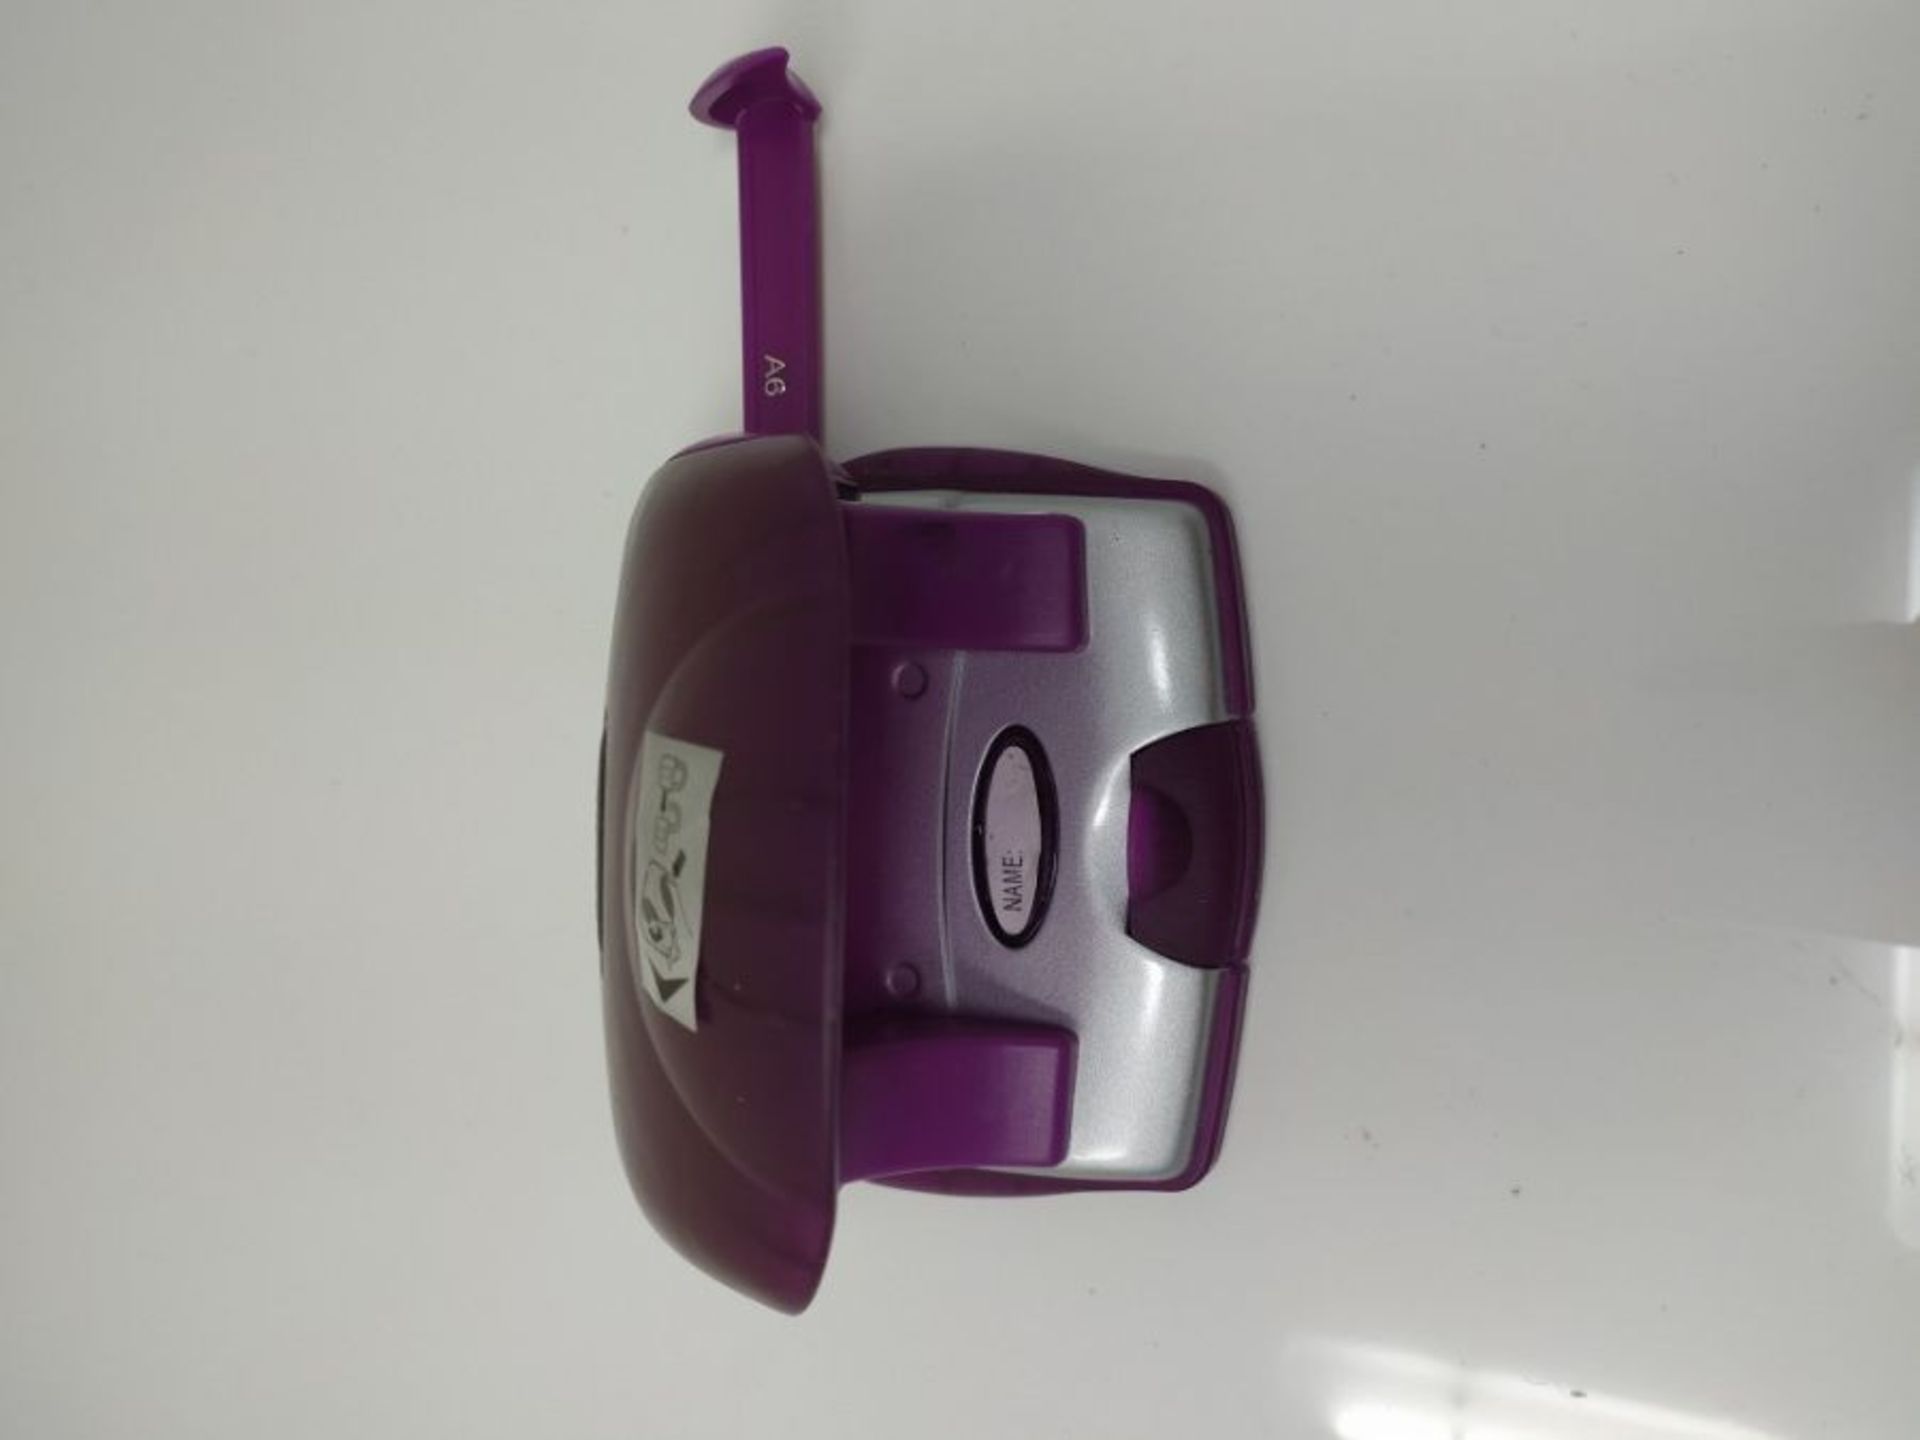 Rexel S215P 2 Hole Punch, 15 Sheet Capacity, Paper Size Guide Bar, Plastic, Purple, 21 - Image 2 of 2